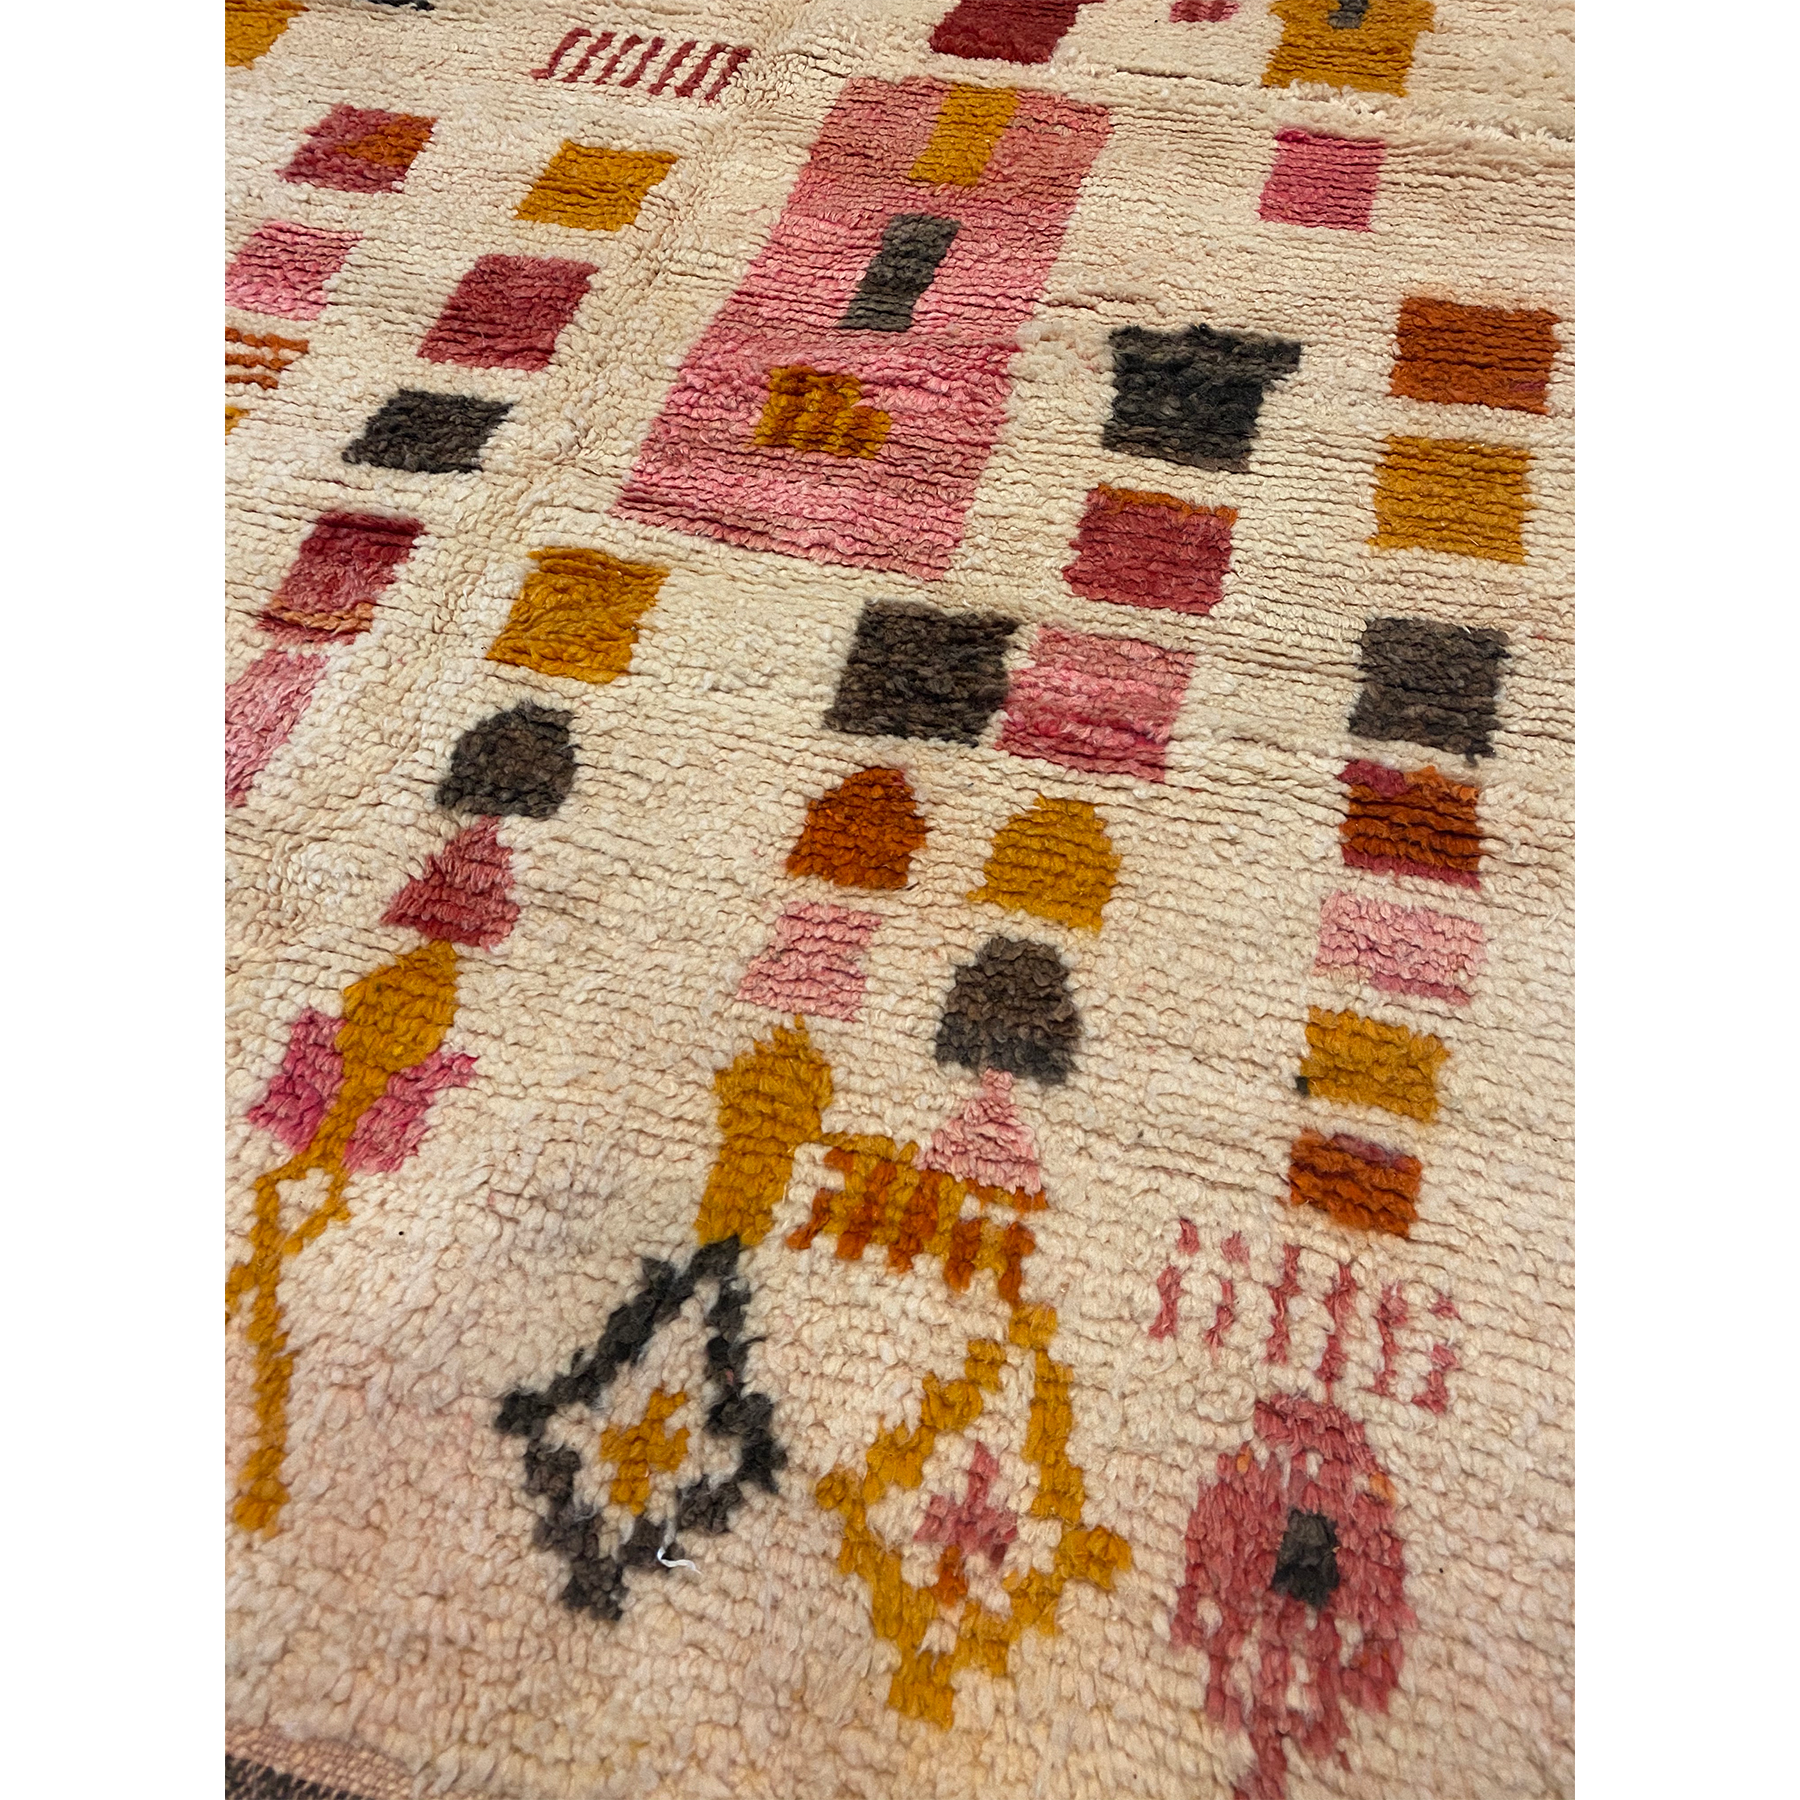 Detail of a modern Moroccan rug that would look best in a child's nursery with pink and mustard yellow designs